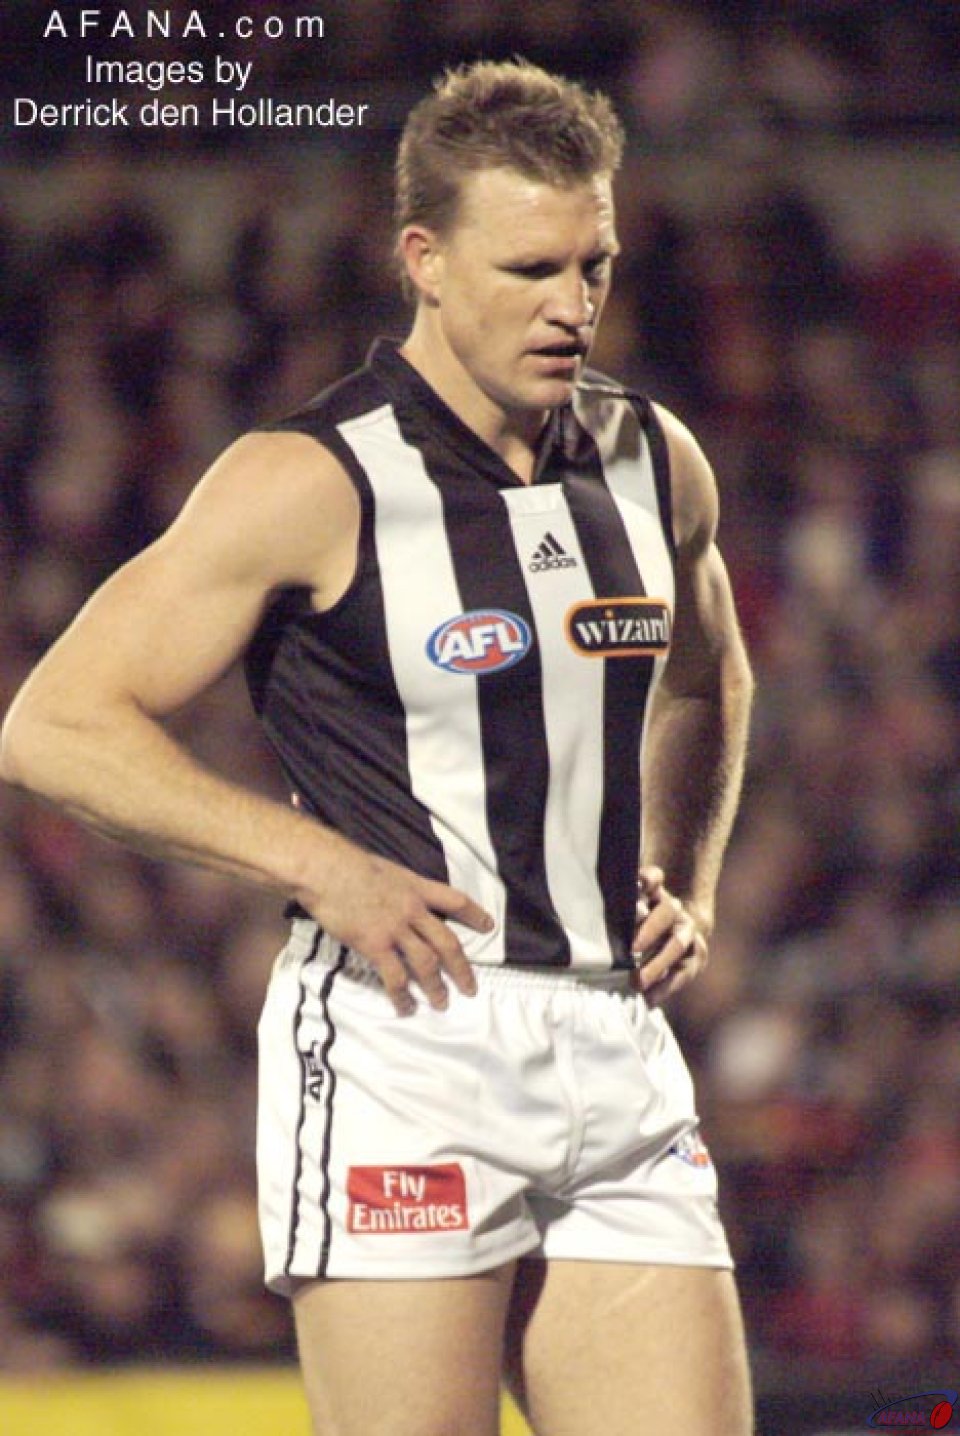 [b]Brownlow Medallist and Collingwood captain Nathan Buckley prepares for battle[/b]